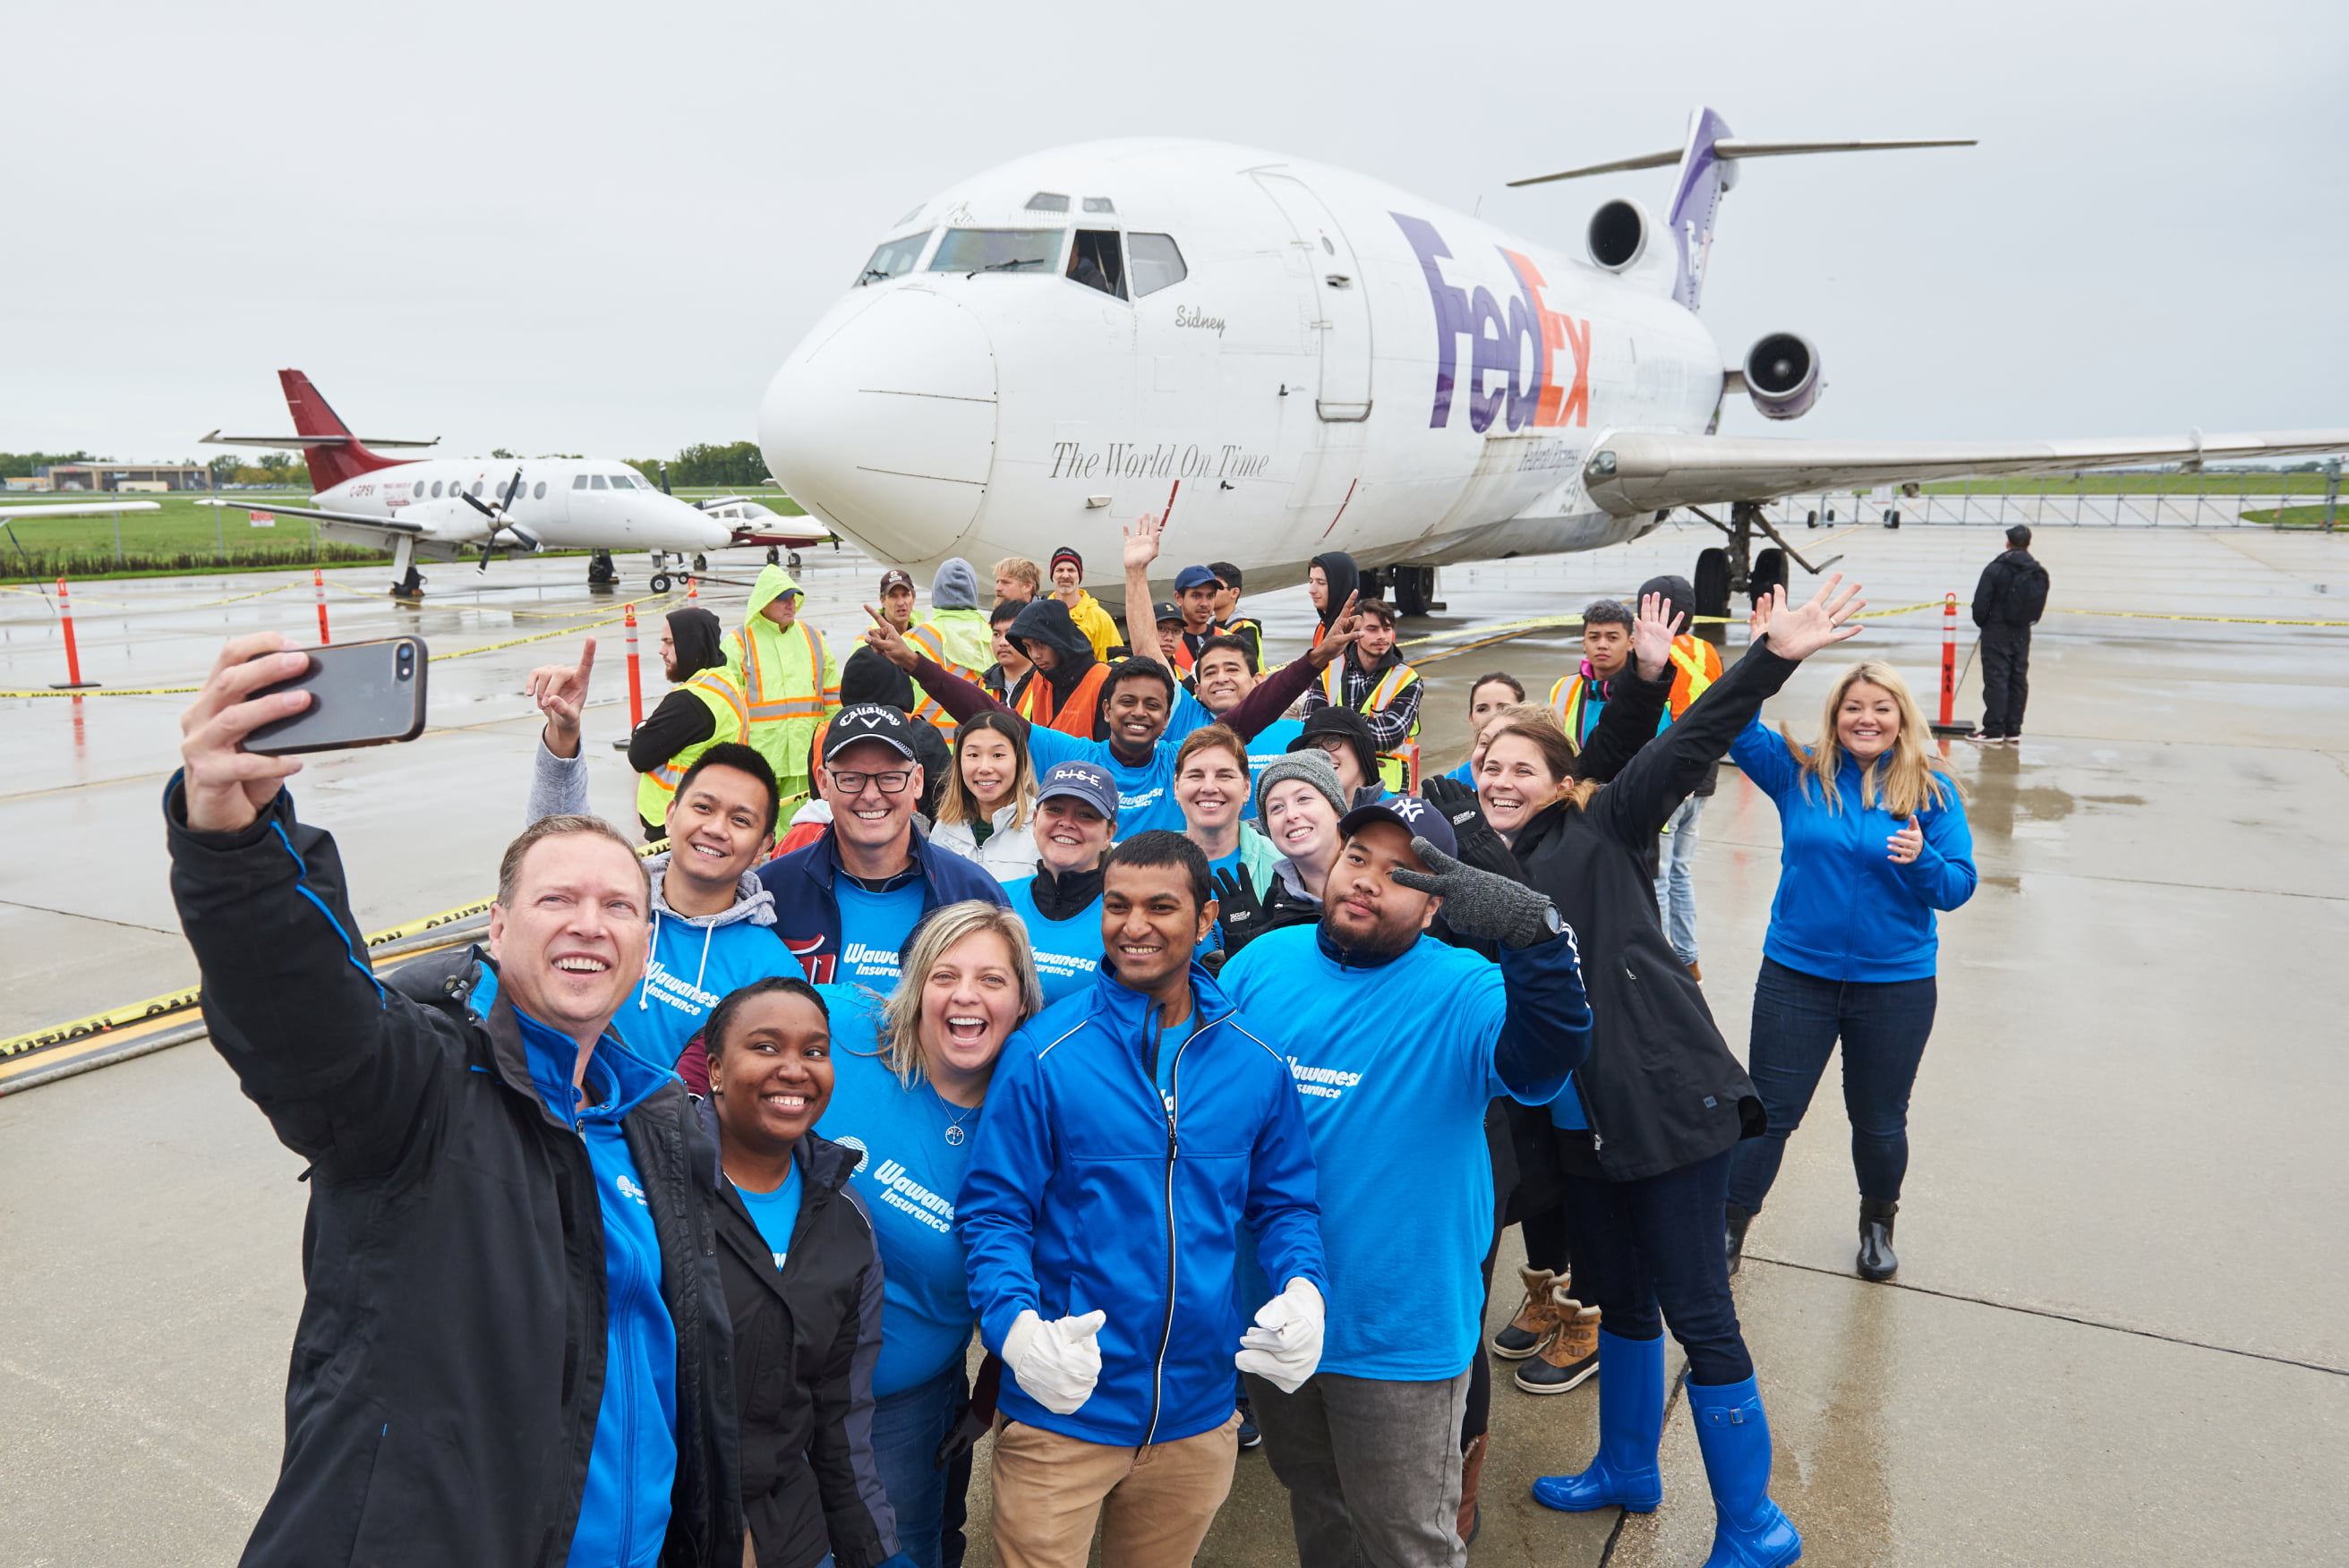 A group of Wawanesa employees in front of a FedEx airplane, taking a group selfie.